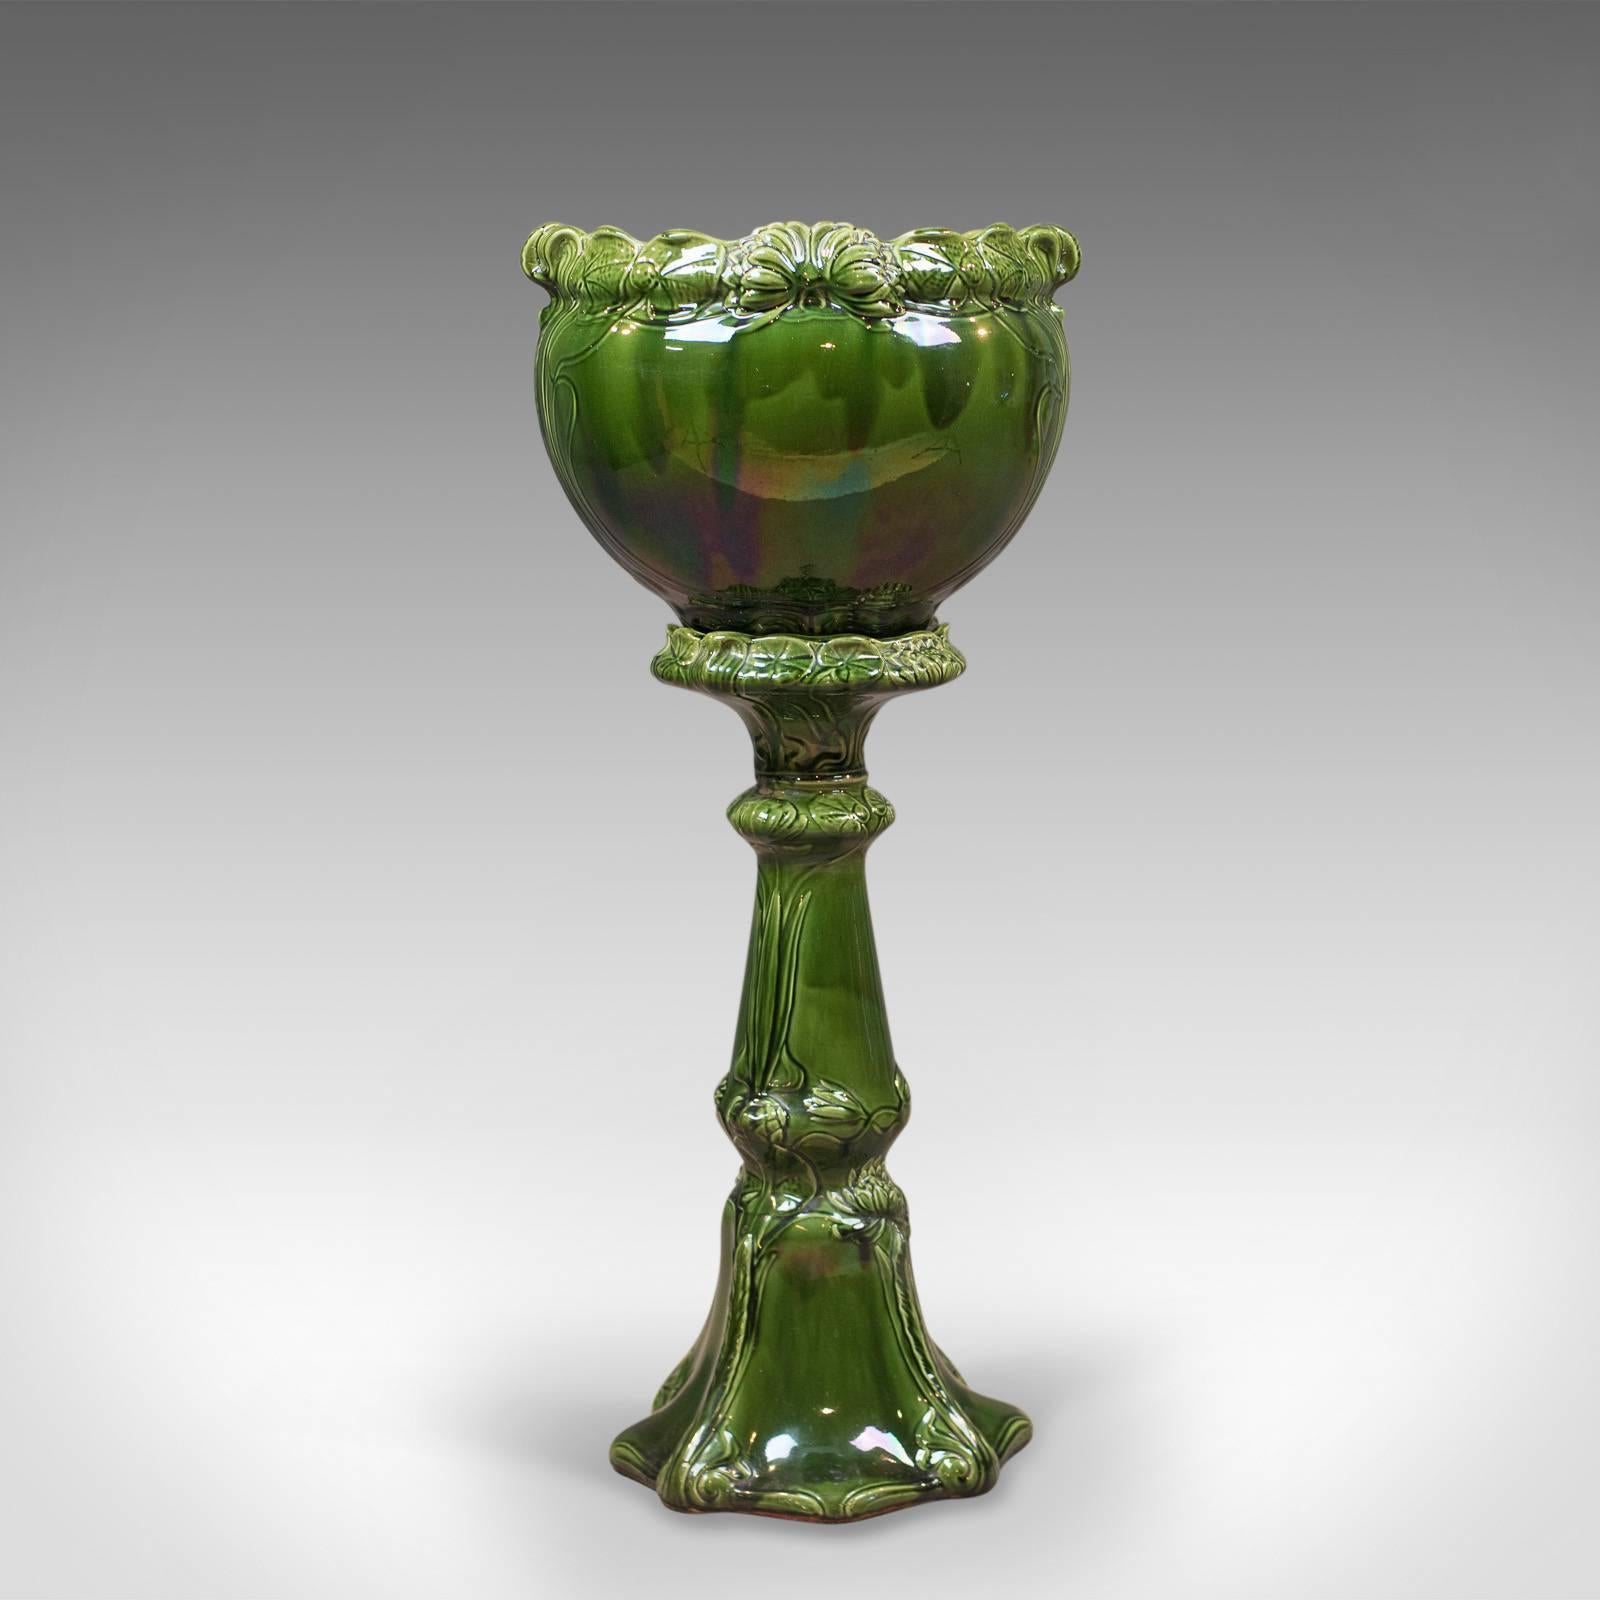 This is an appealing antique jardinière in excellent condition dating to the late Victorian period, circa 1880.

Beautifully presented pottery in hues of natural green
The stand and pot rim featuring foliate decoration
Large pot to accommodate a